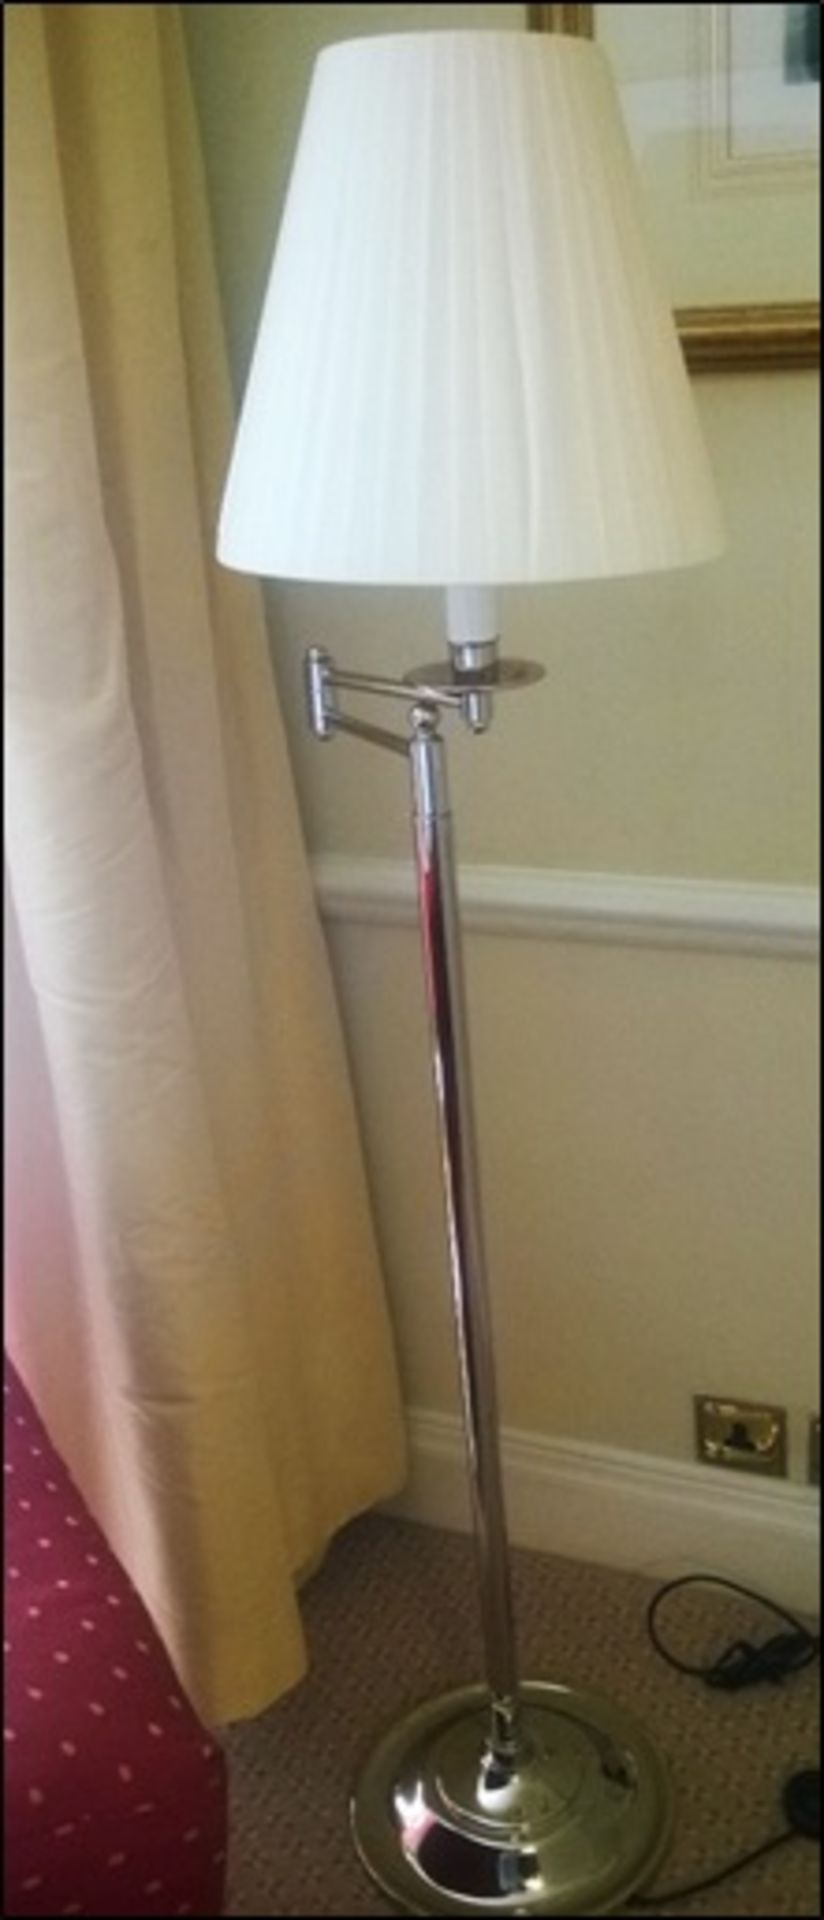 A silver metal swing arm floor standing lamp with shade Room204Lift out charge 5